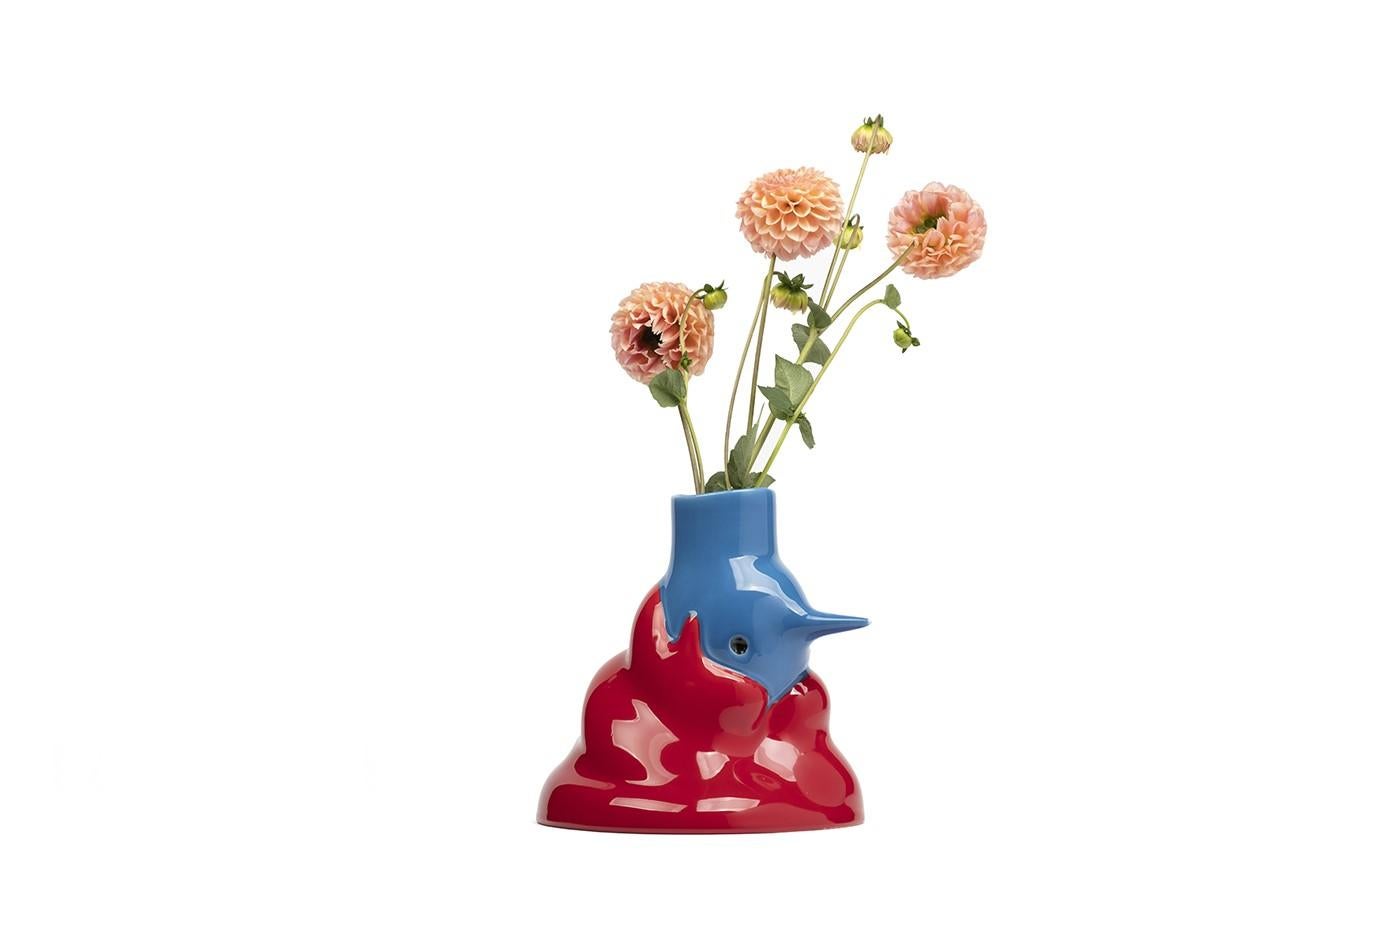 Following the release of the first “Upside Down Face Vase”, Parra presents the latest addition to the series. This female counterpart marks the conclusion of these iconic vases. Where the first edition stood out because of its boldness, this bird